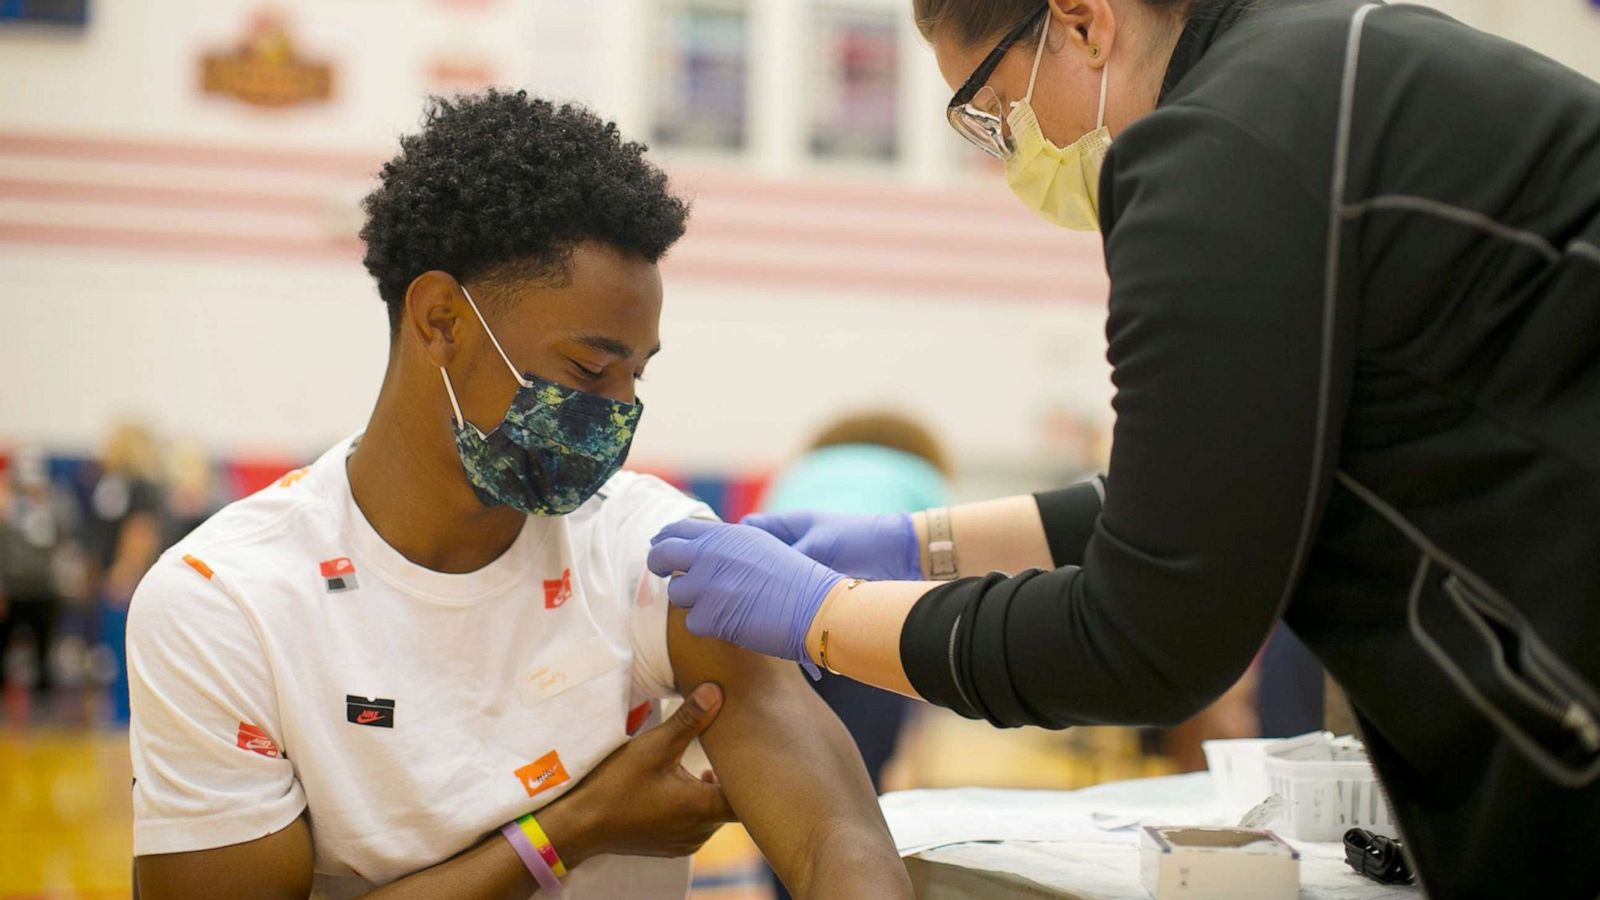 High schoolers are getting the COVID-19 vaccine. What do they think? - ABC  News